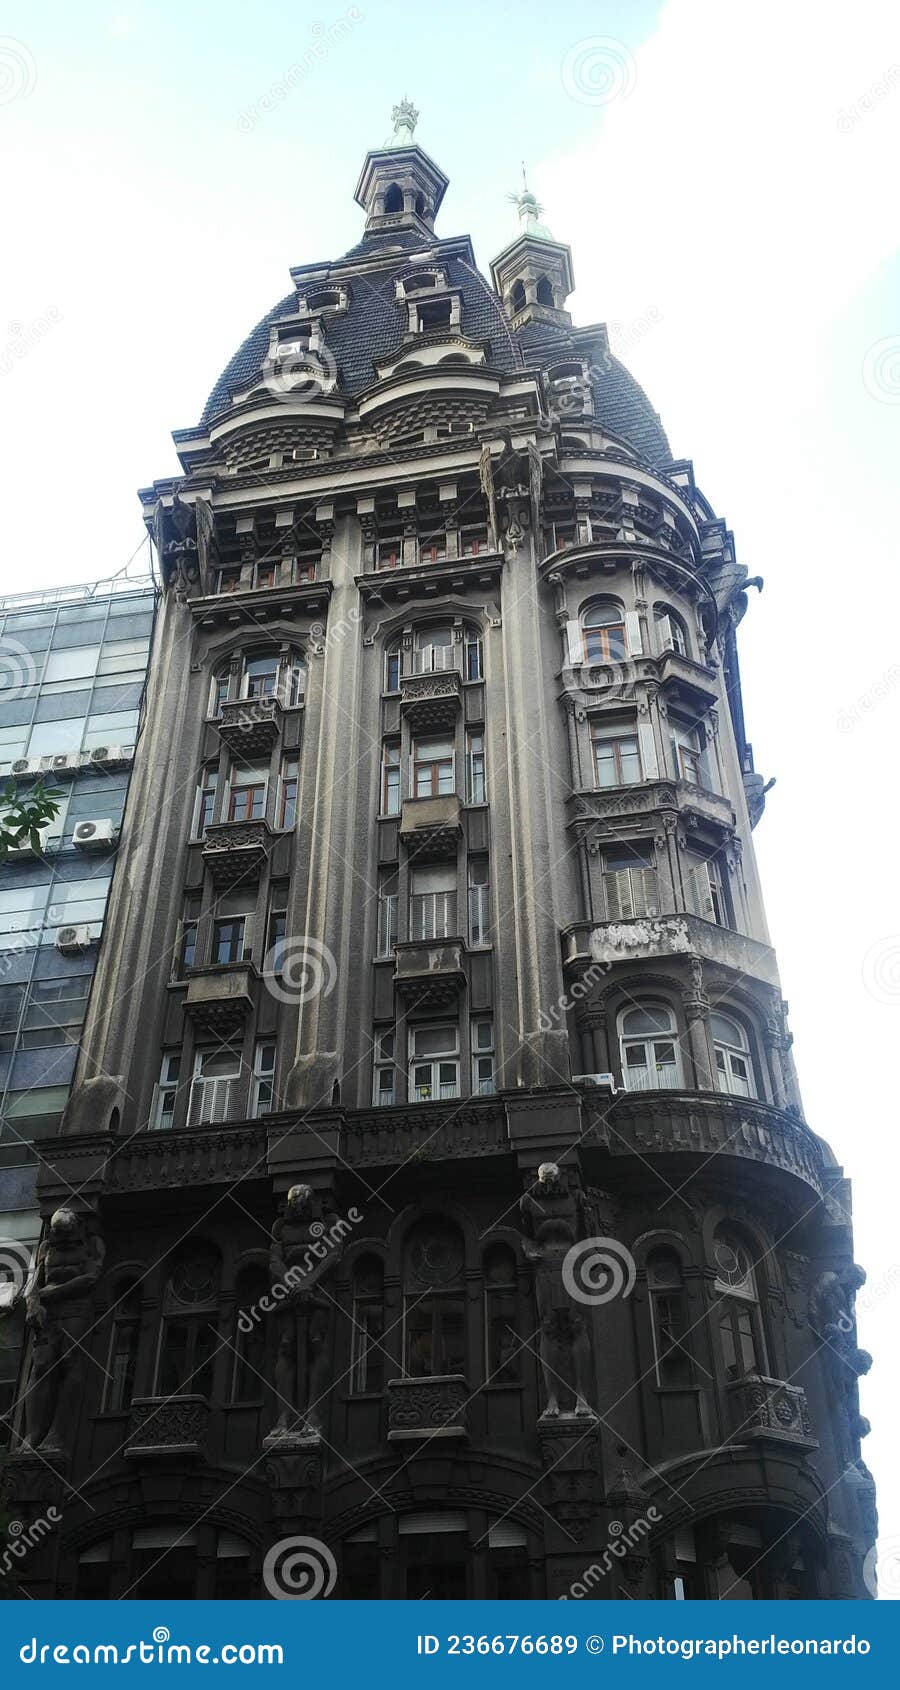 view of otto wulff building in german modenist style, on belgrano and peru avenues, buenos aires, argentina